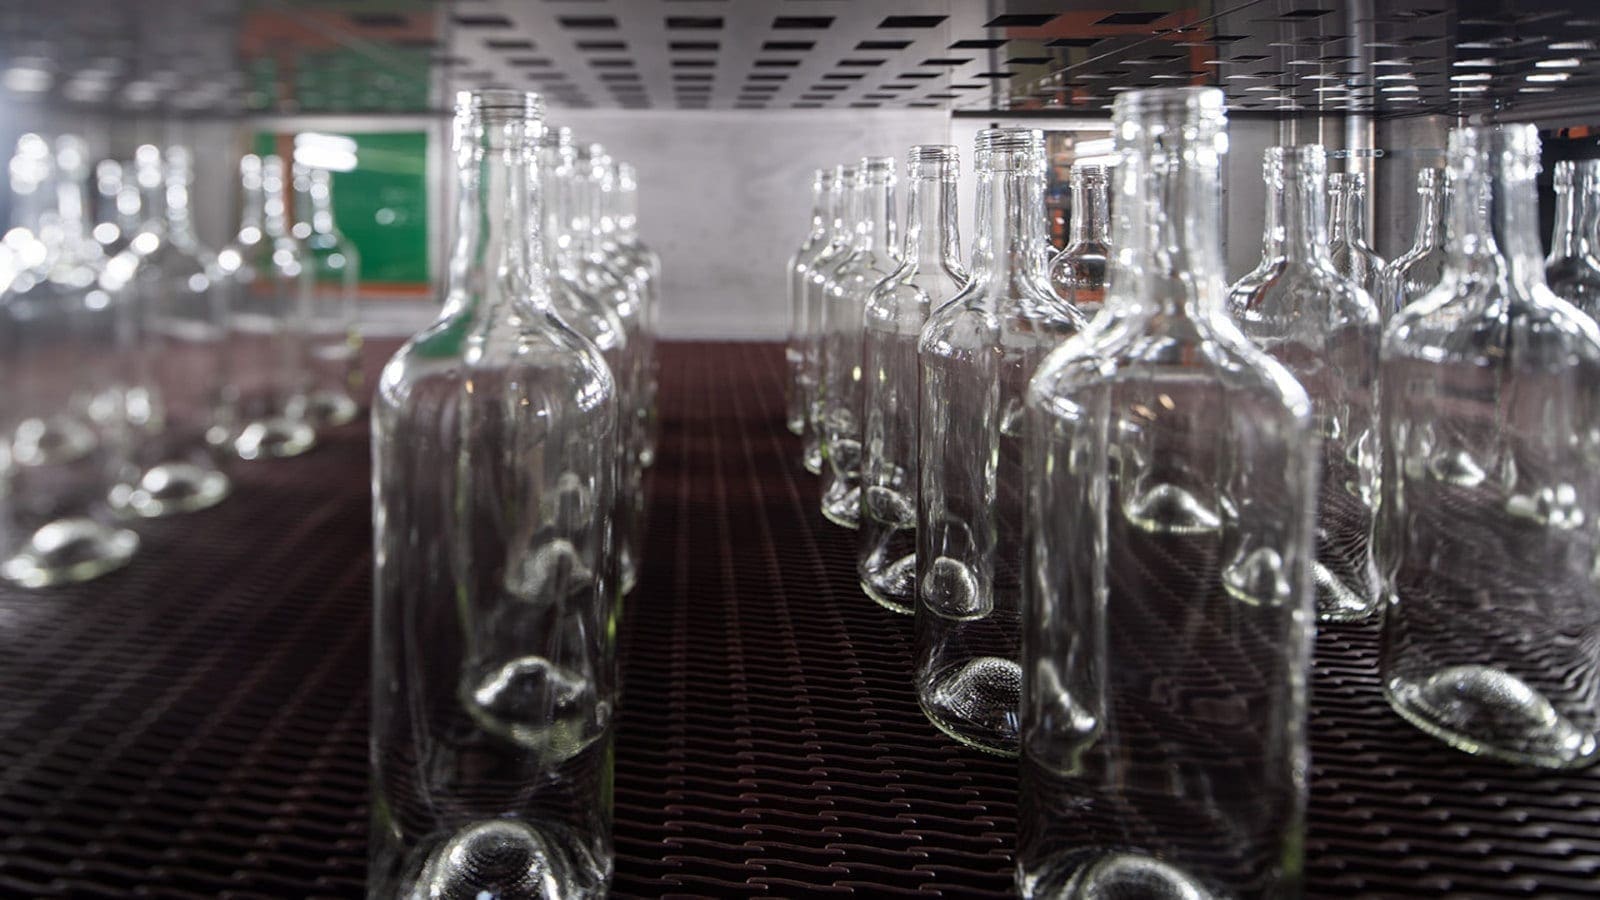 O-I Glass collaborates with Krones to create solutions for the glass packaging market